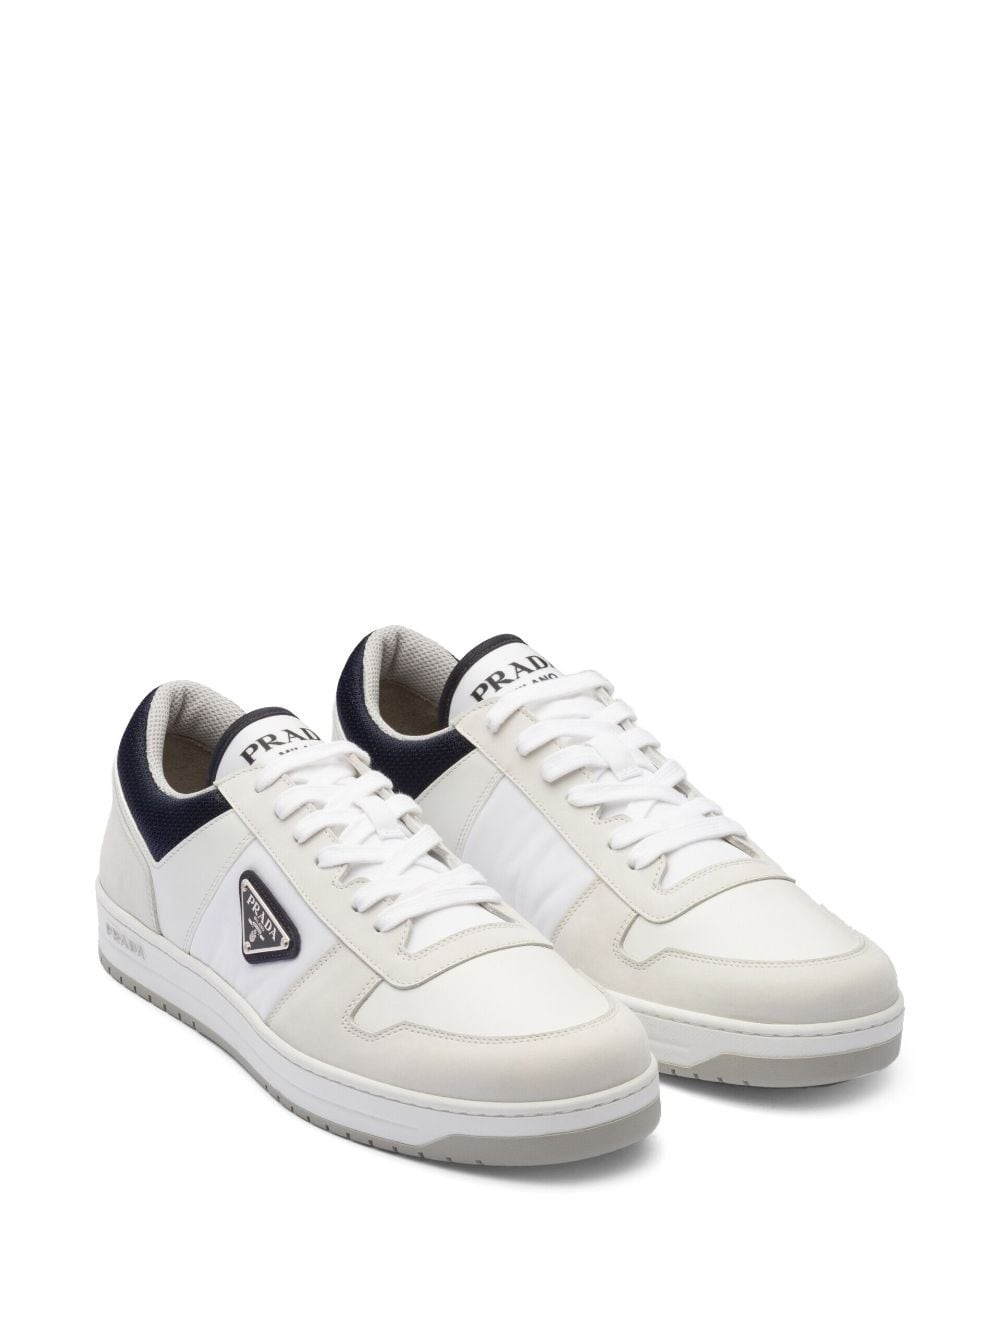 prada SNEAKERS available on montiboutique.com - 56674